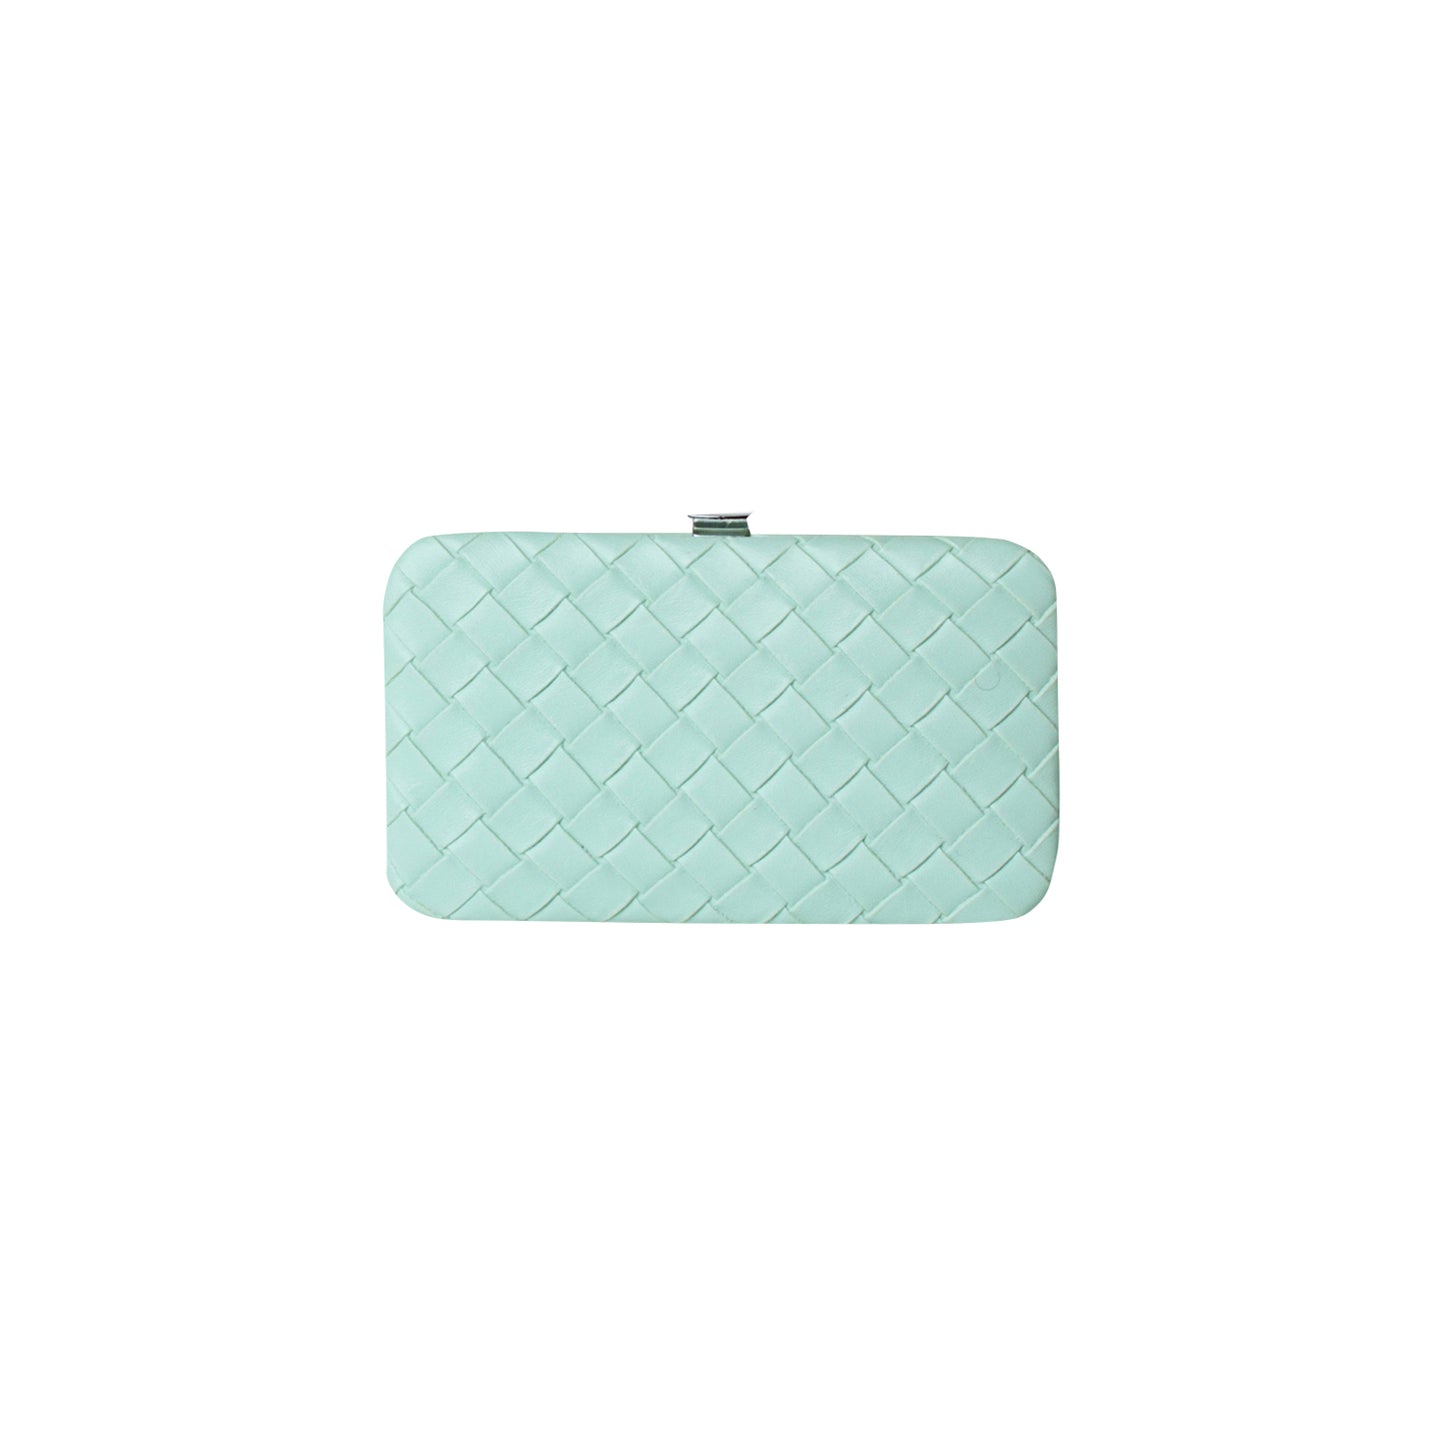 Manicure Set Woven Teal